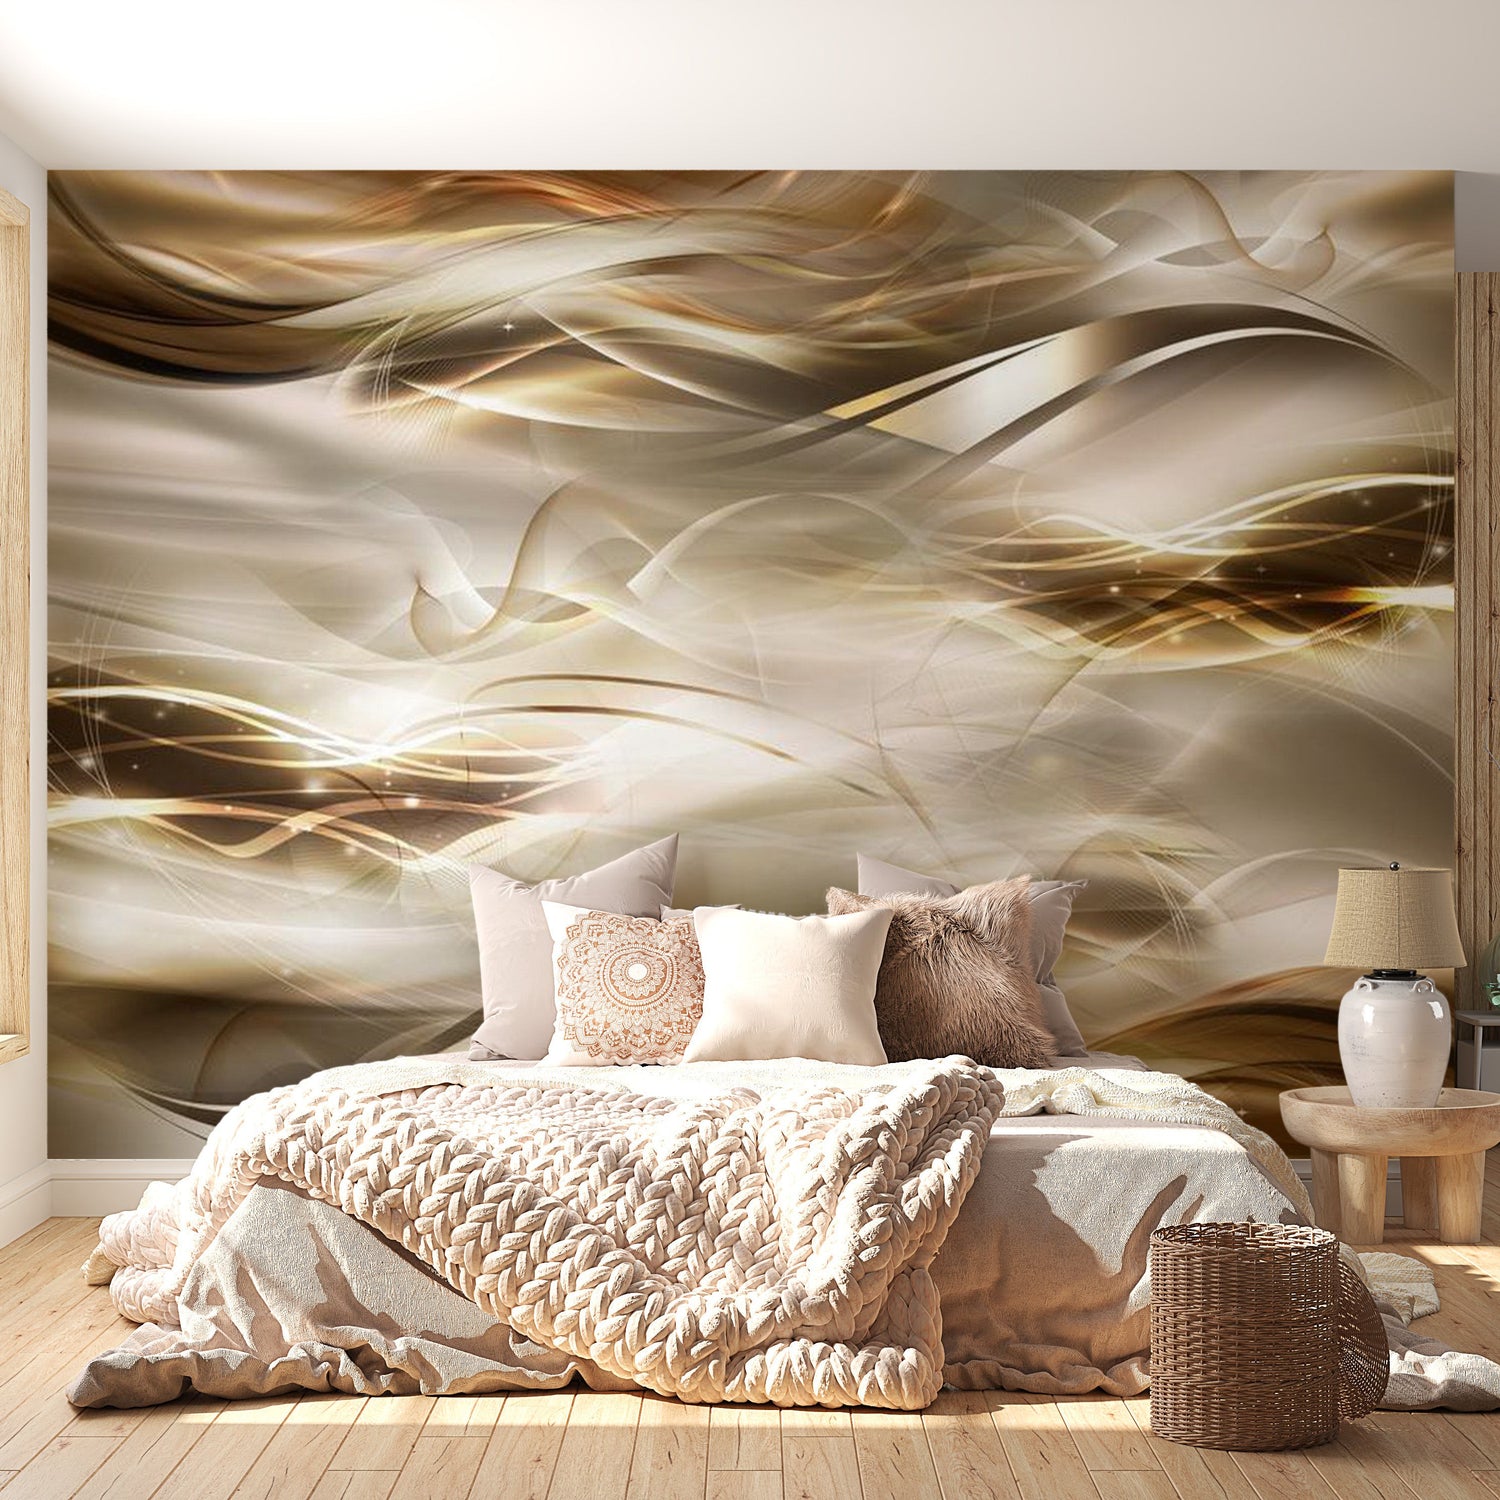 Peel & Stick Glam Wall Mural - Amber River - Removable Wall Decals